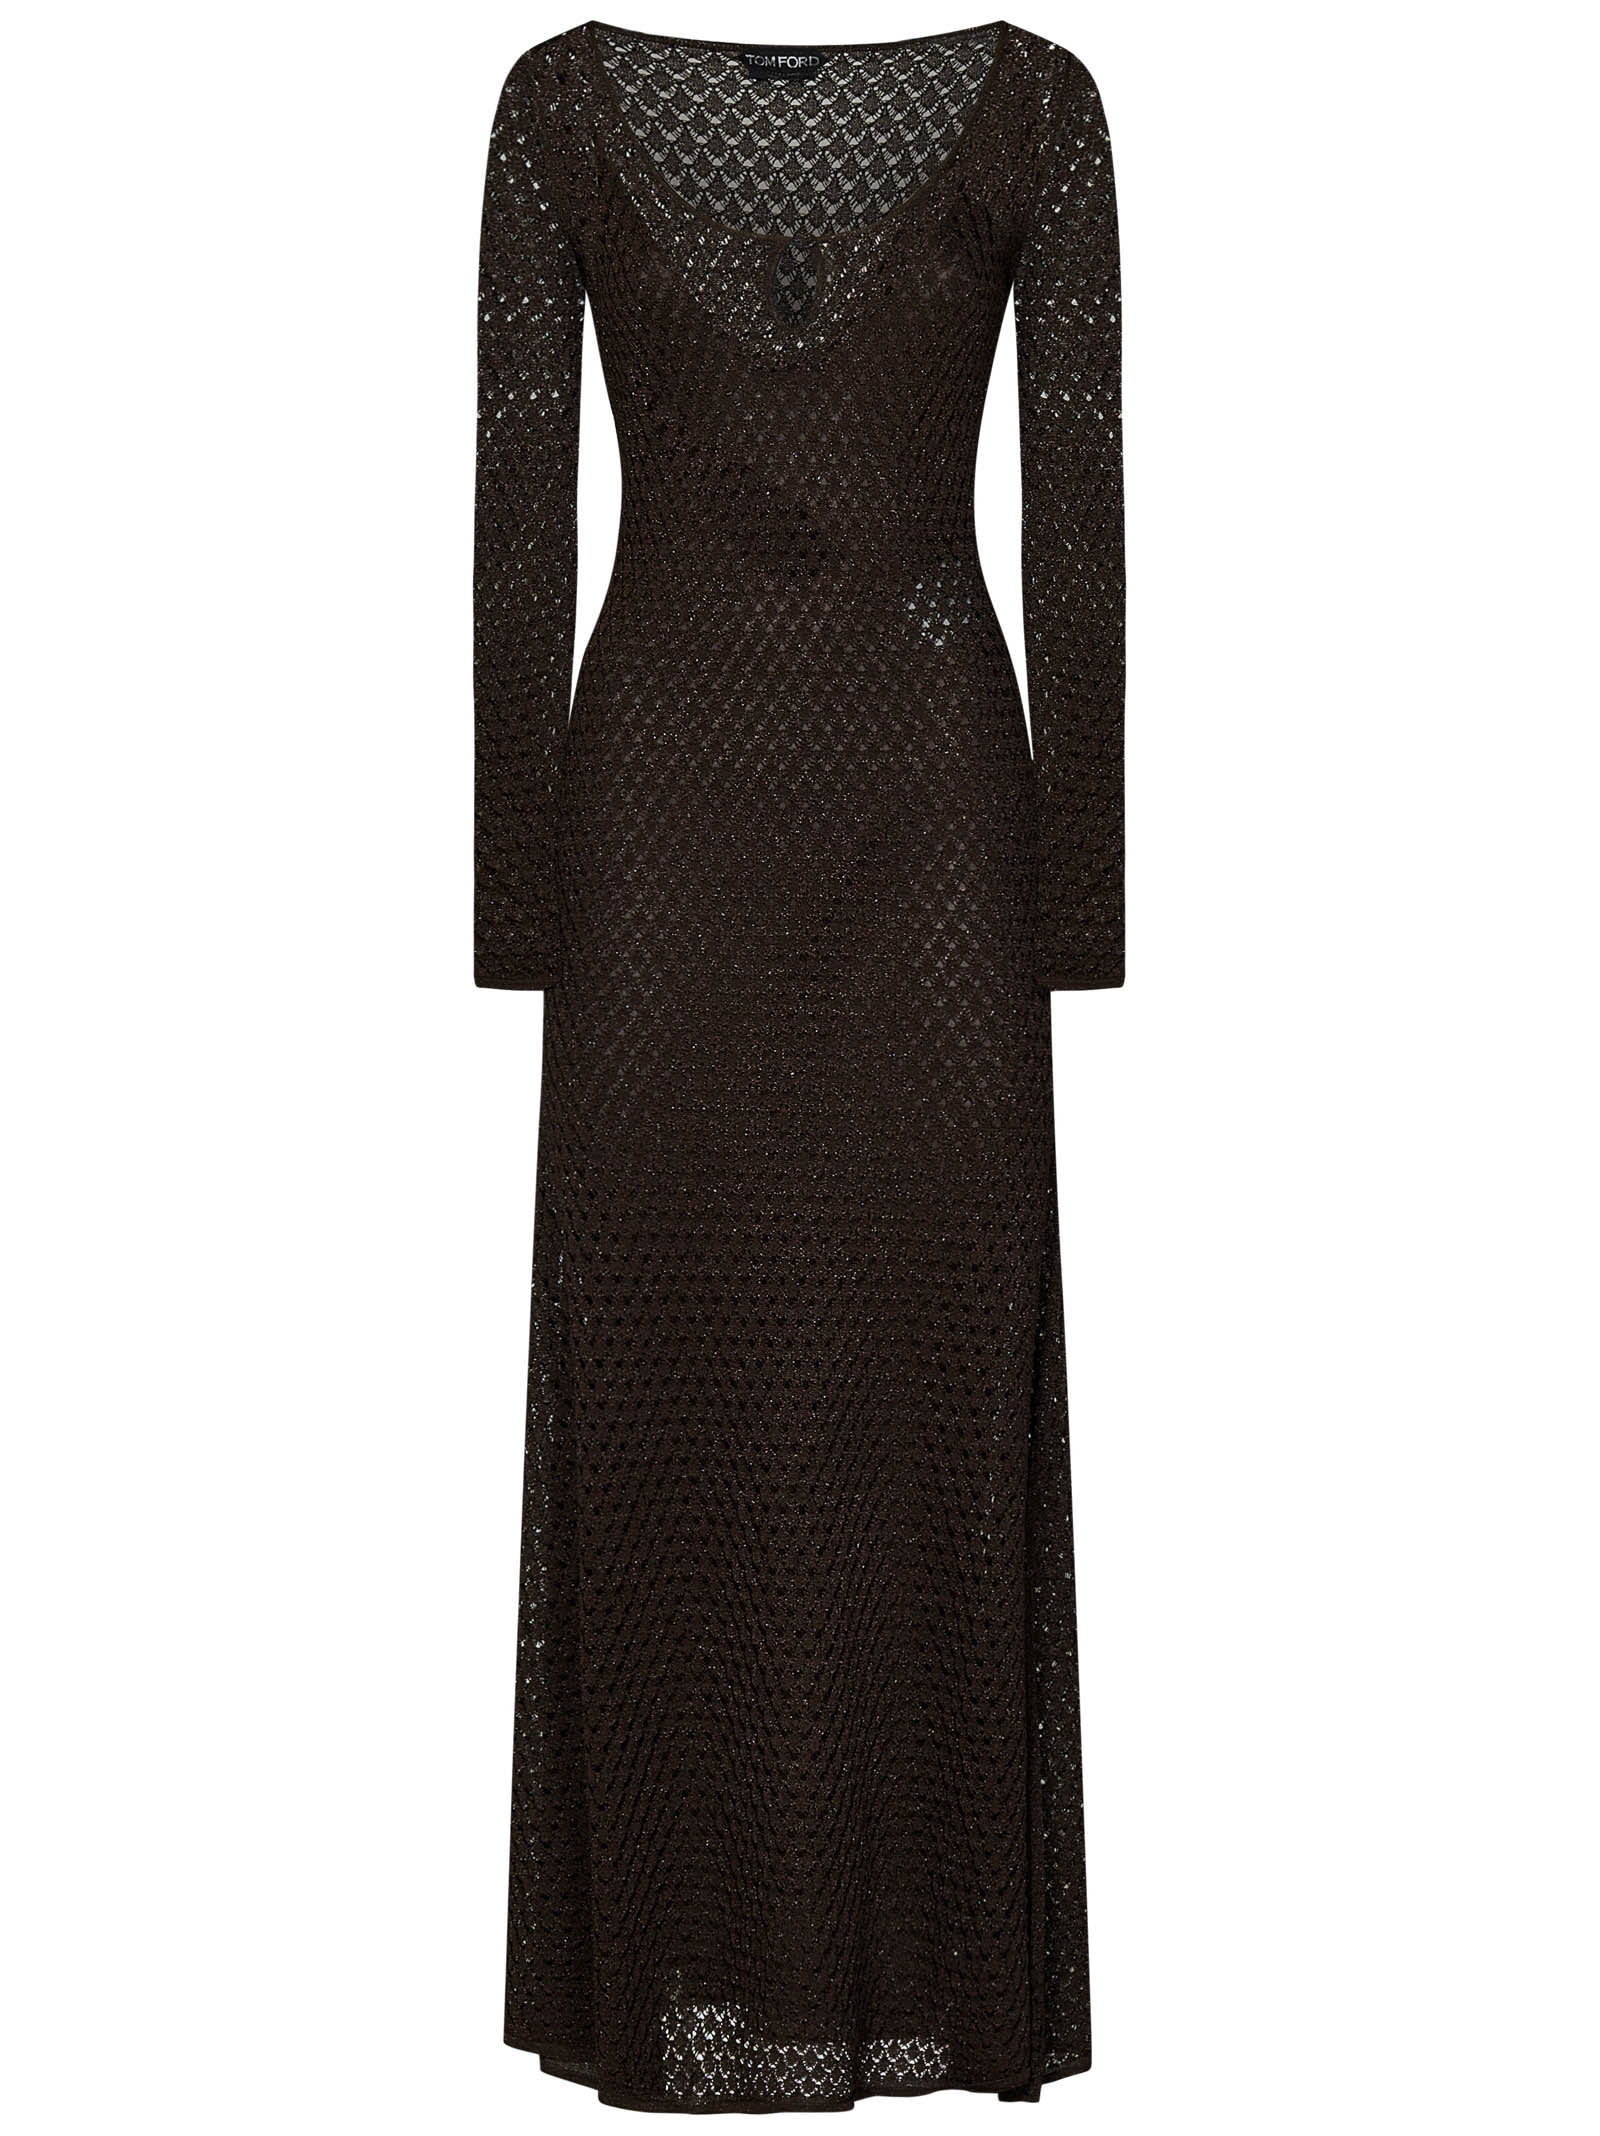 Shop Tom Ford Long Dress In Choccolate Brown